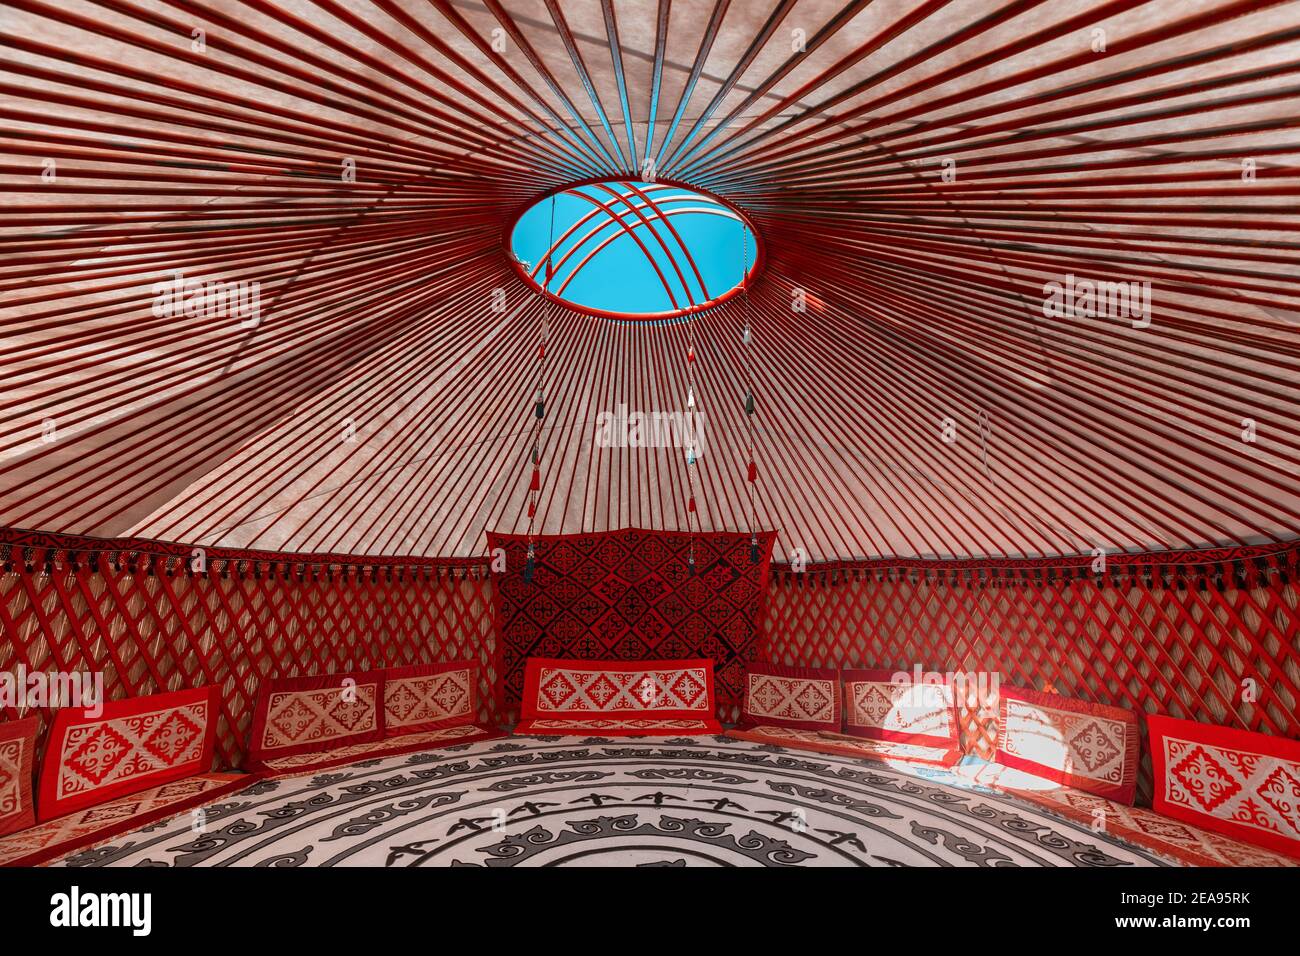 Interior of a Yurt. It is a portable tent house in the culture of Central Asian nomadic peoples. Ethnic and folk patterns for home decoration Stock Photo